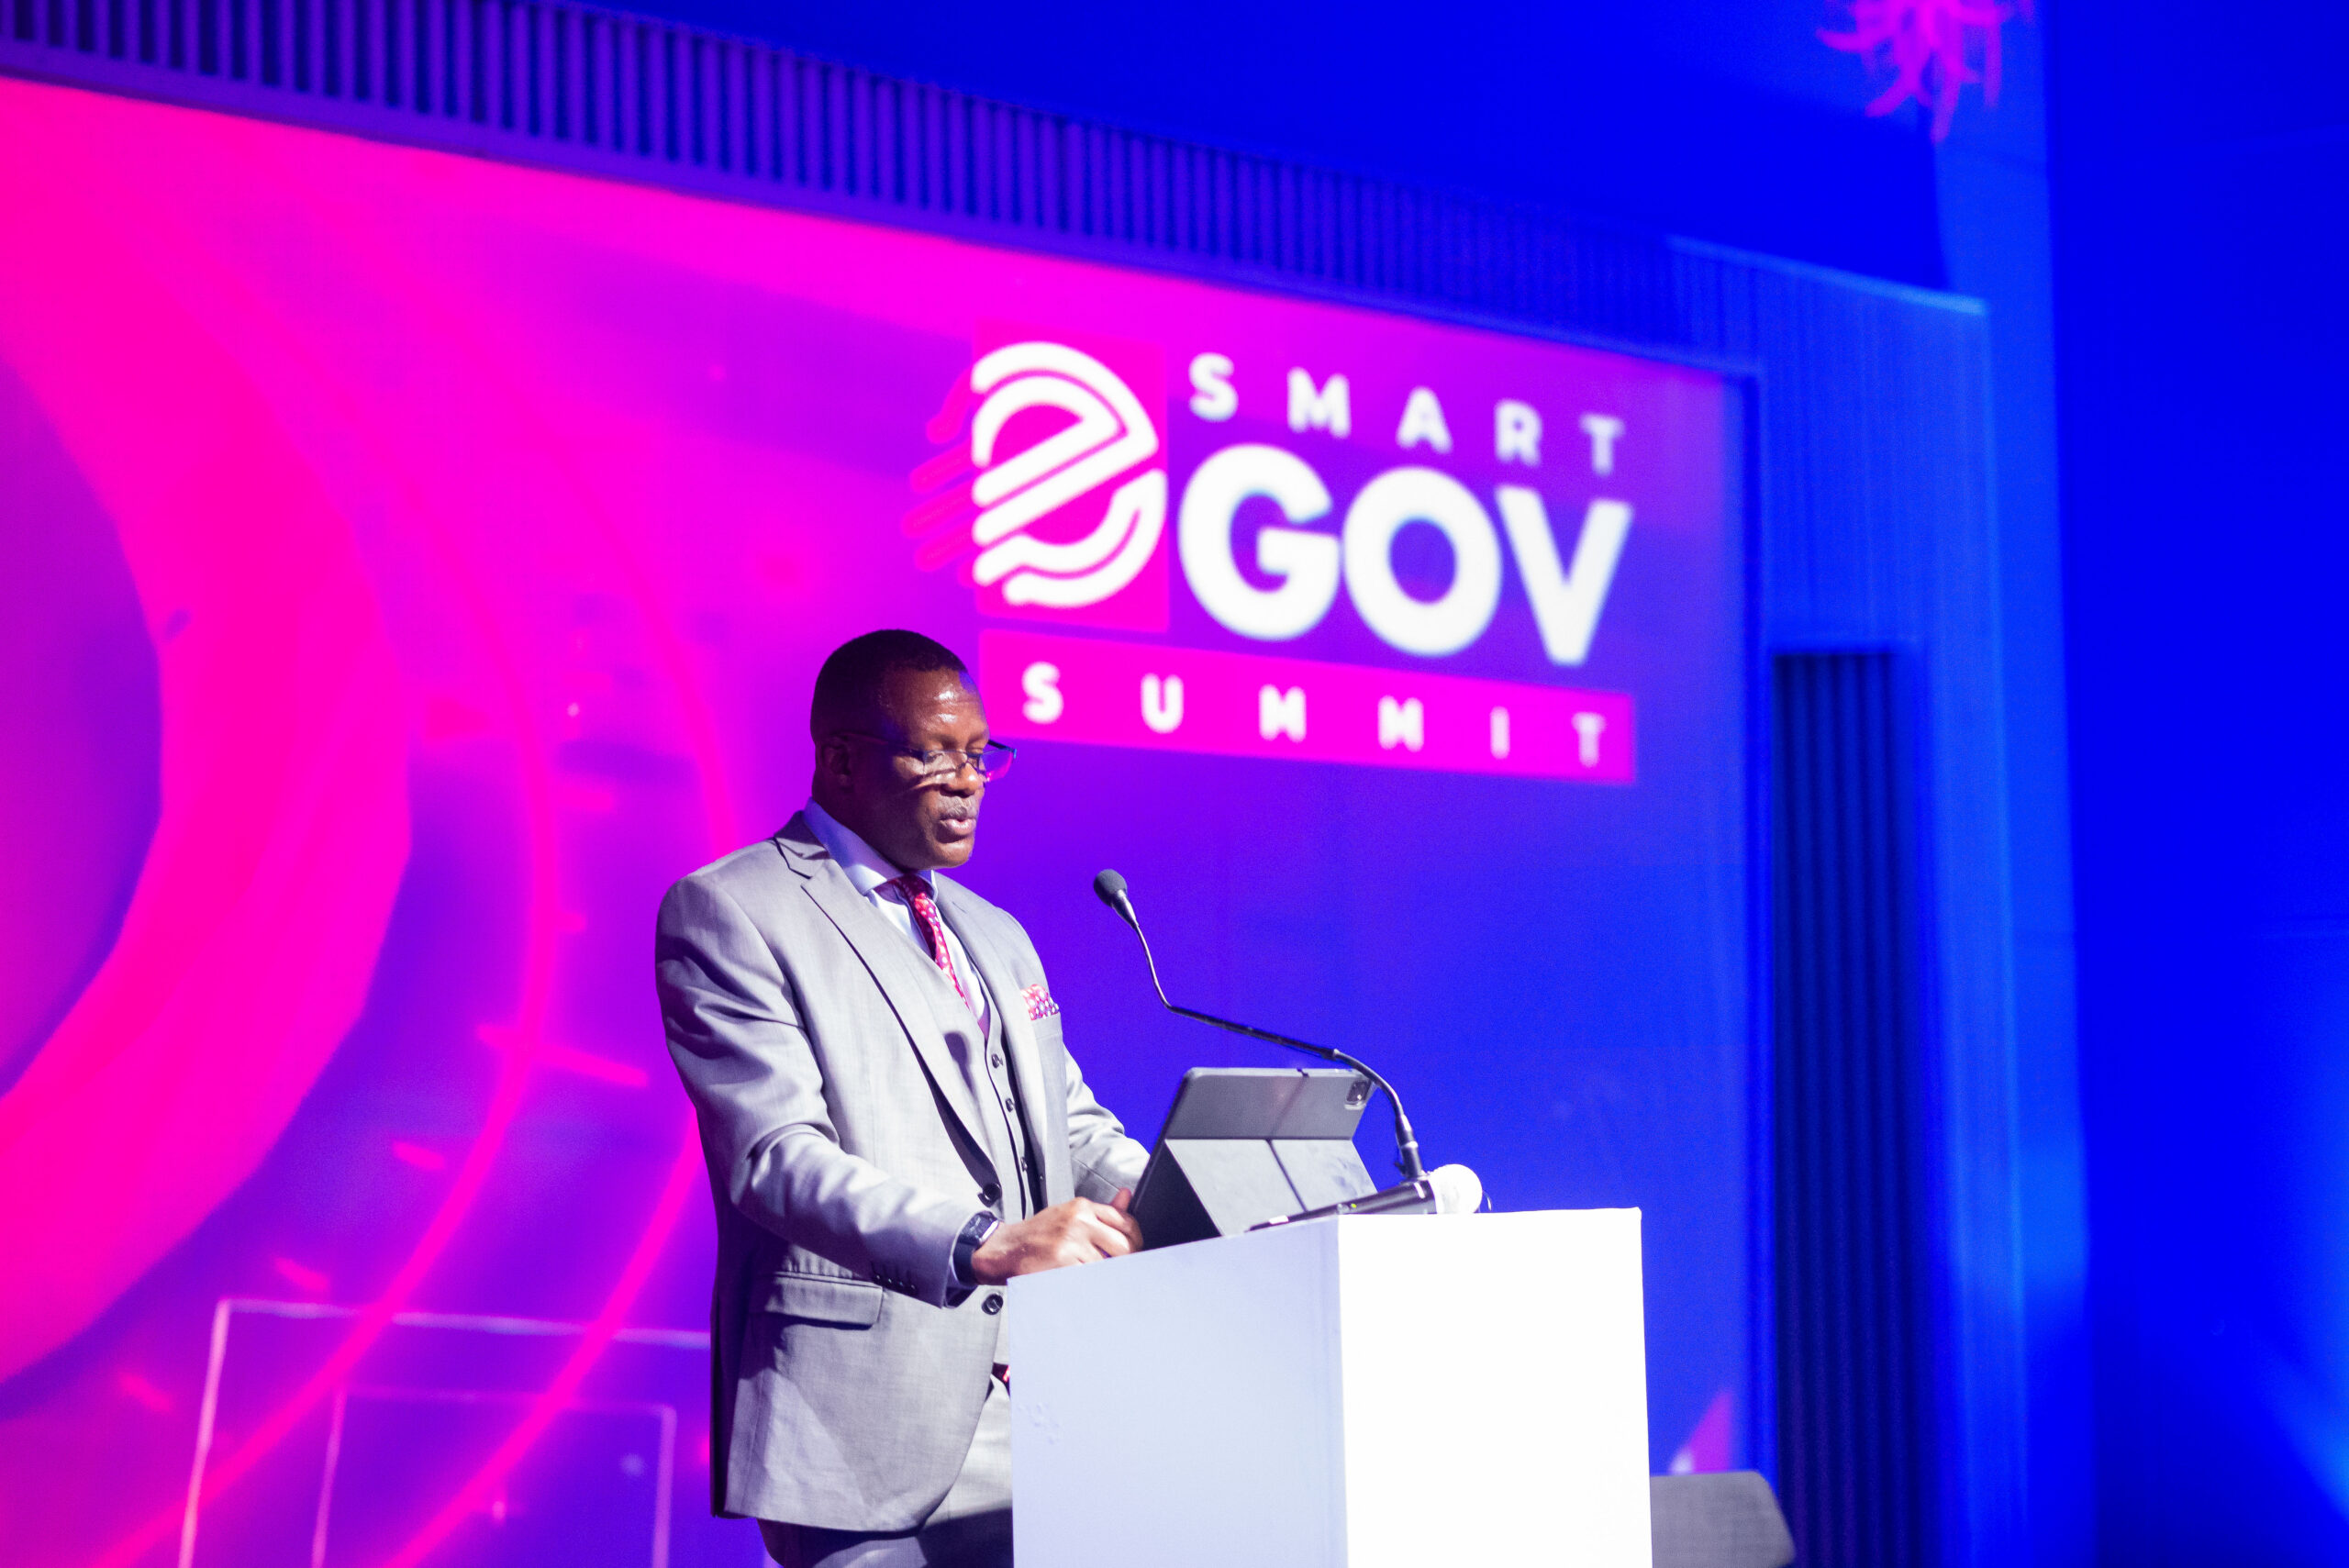 Eliud Owalo, the Cabinet Secretary at the Ministry of ICT and Digital Economy, addressing delegates at the SmartGov Summit